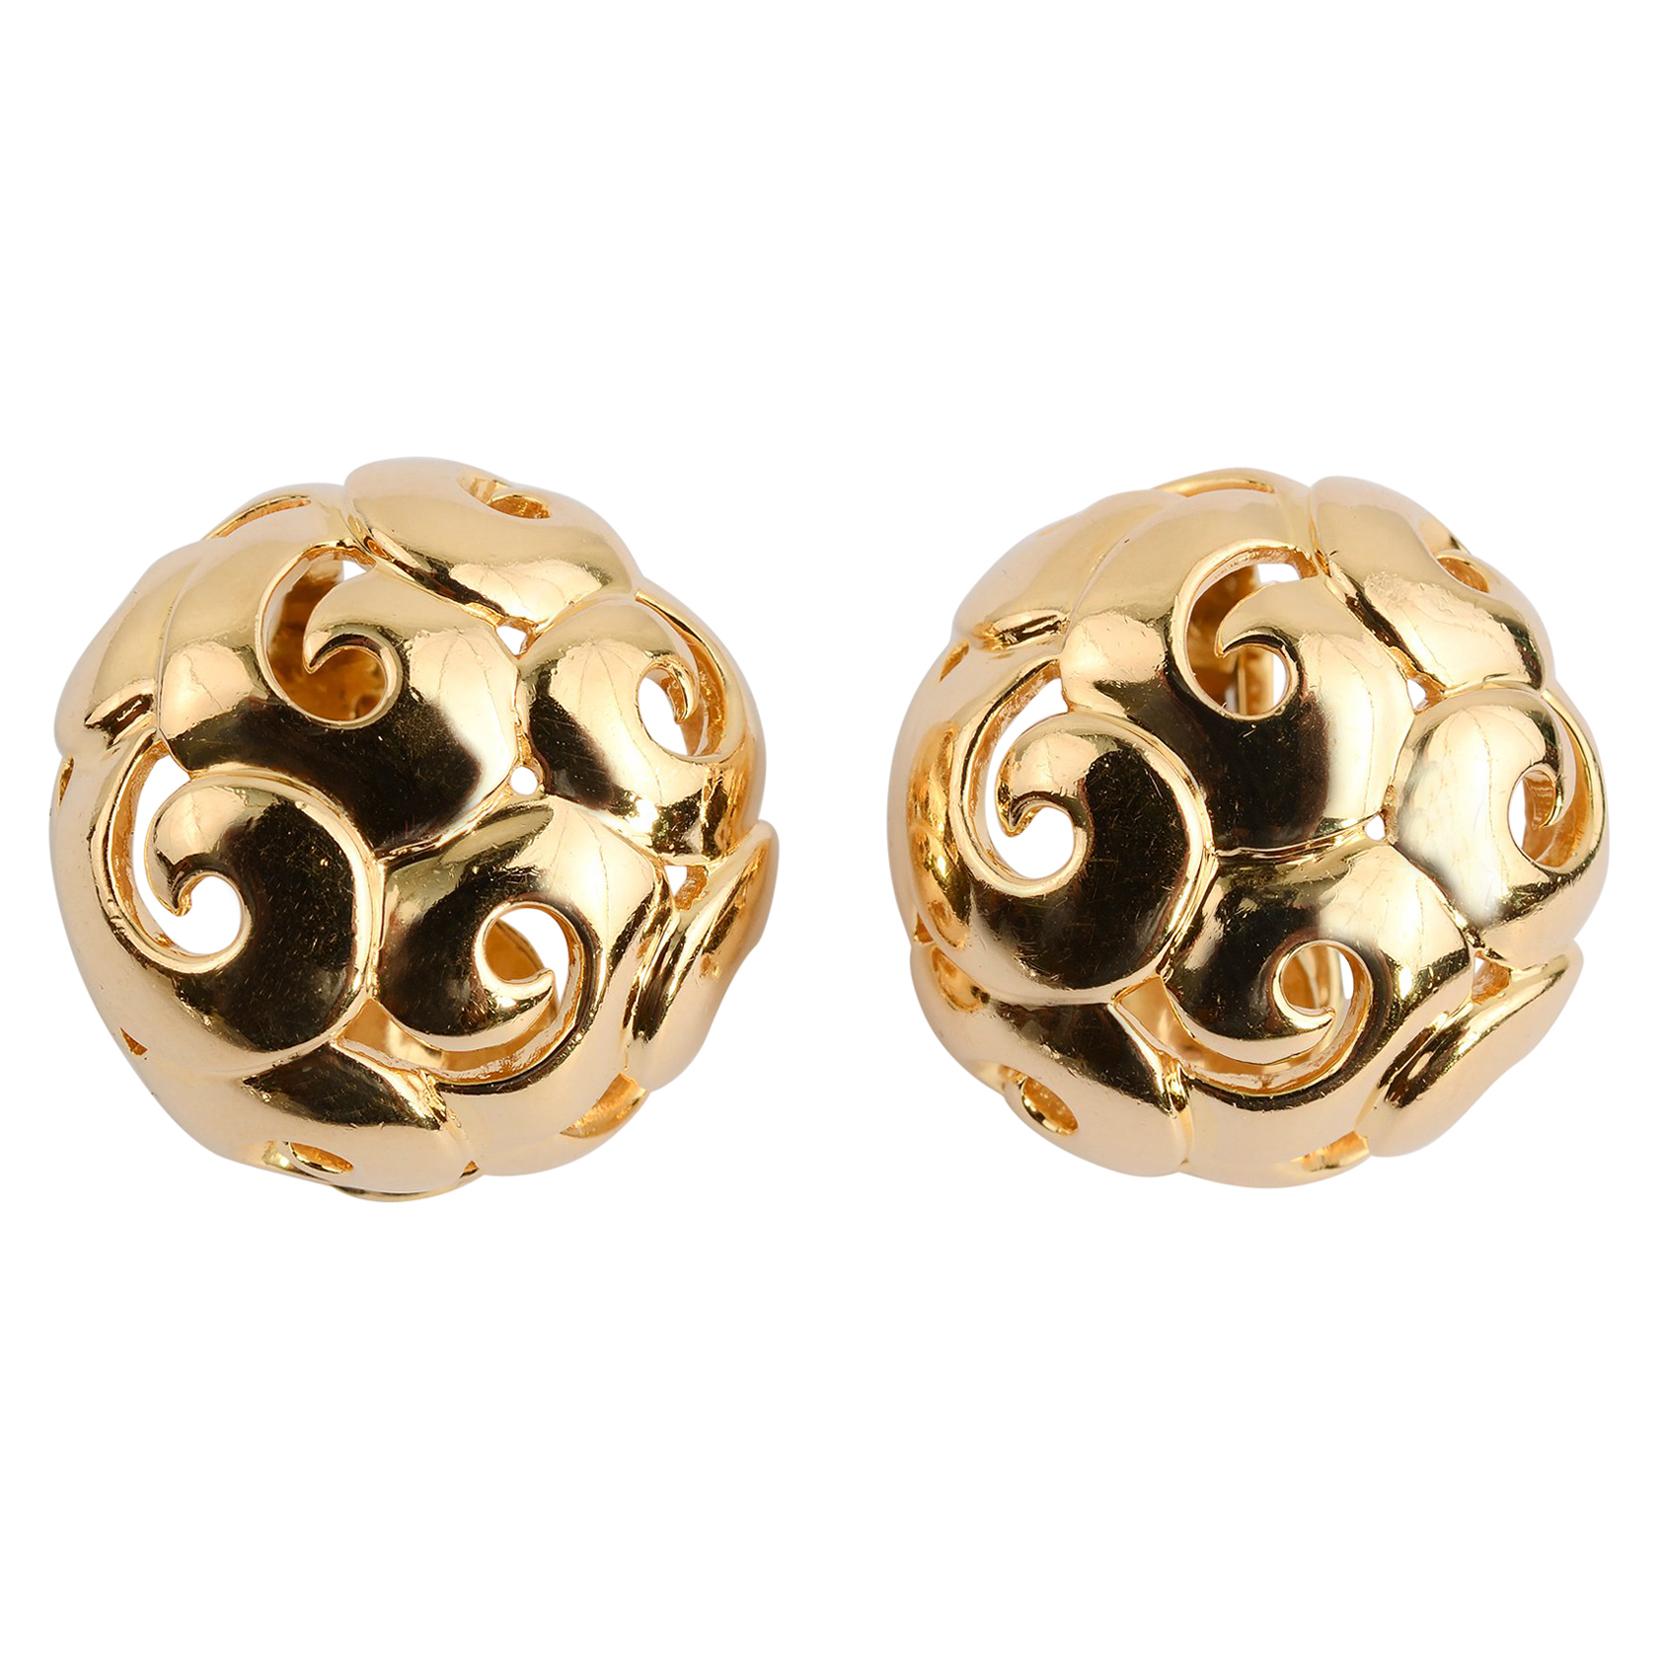 Gumps Gold Dome Earrings with Circular Design